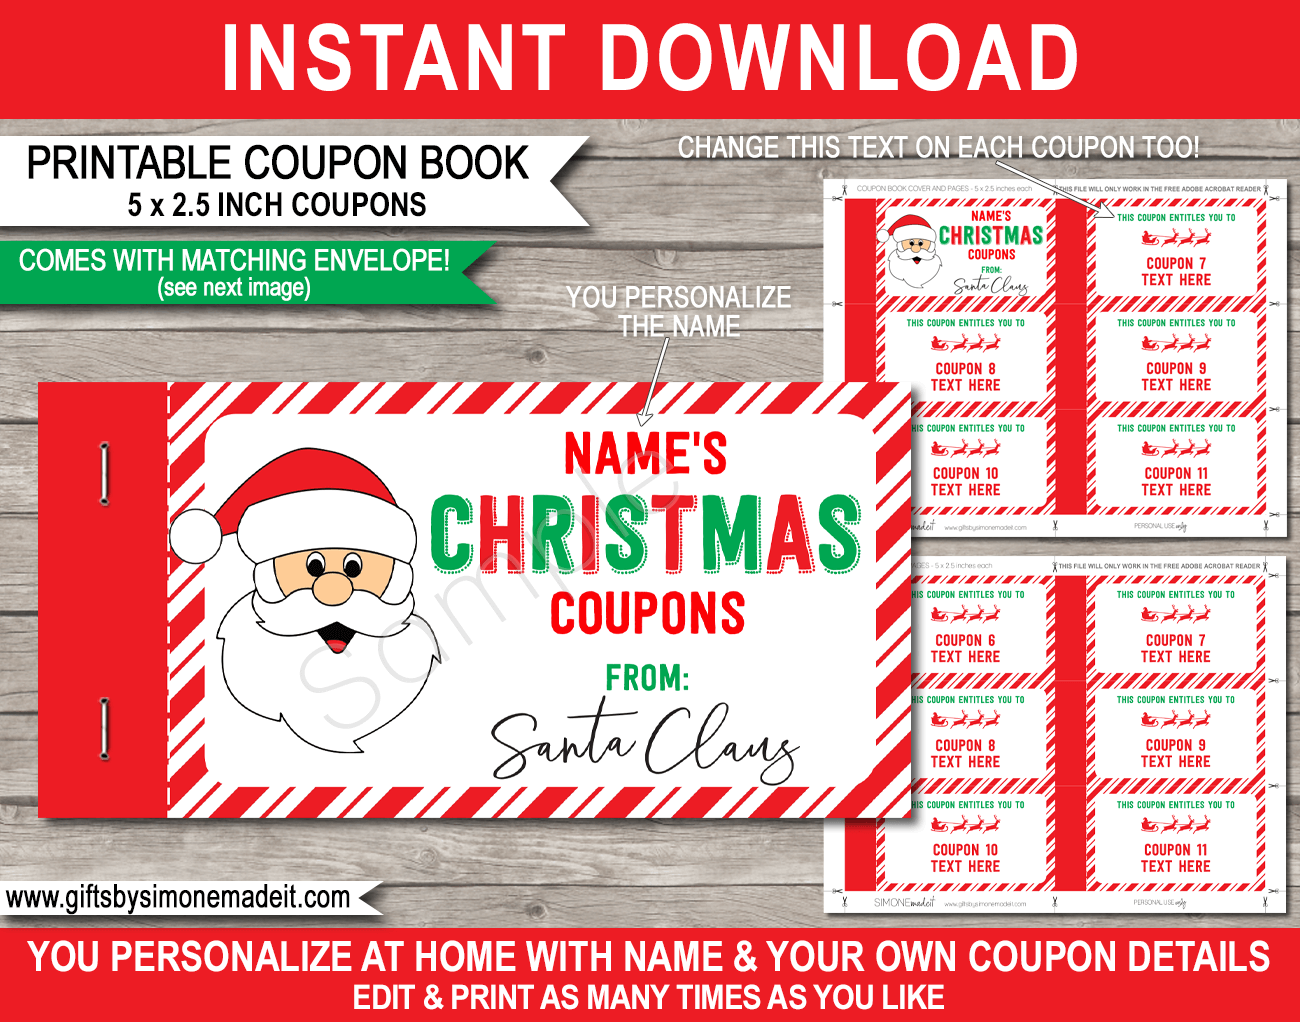 Coupon Book from Santa Template | Printable Personalized Christmas Gift